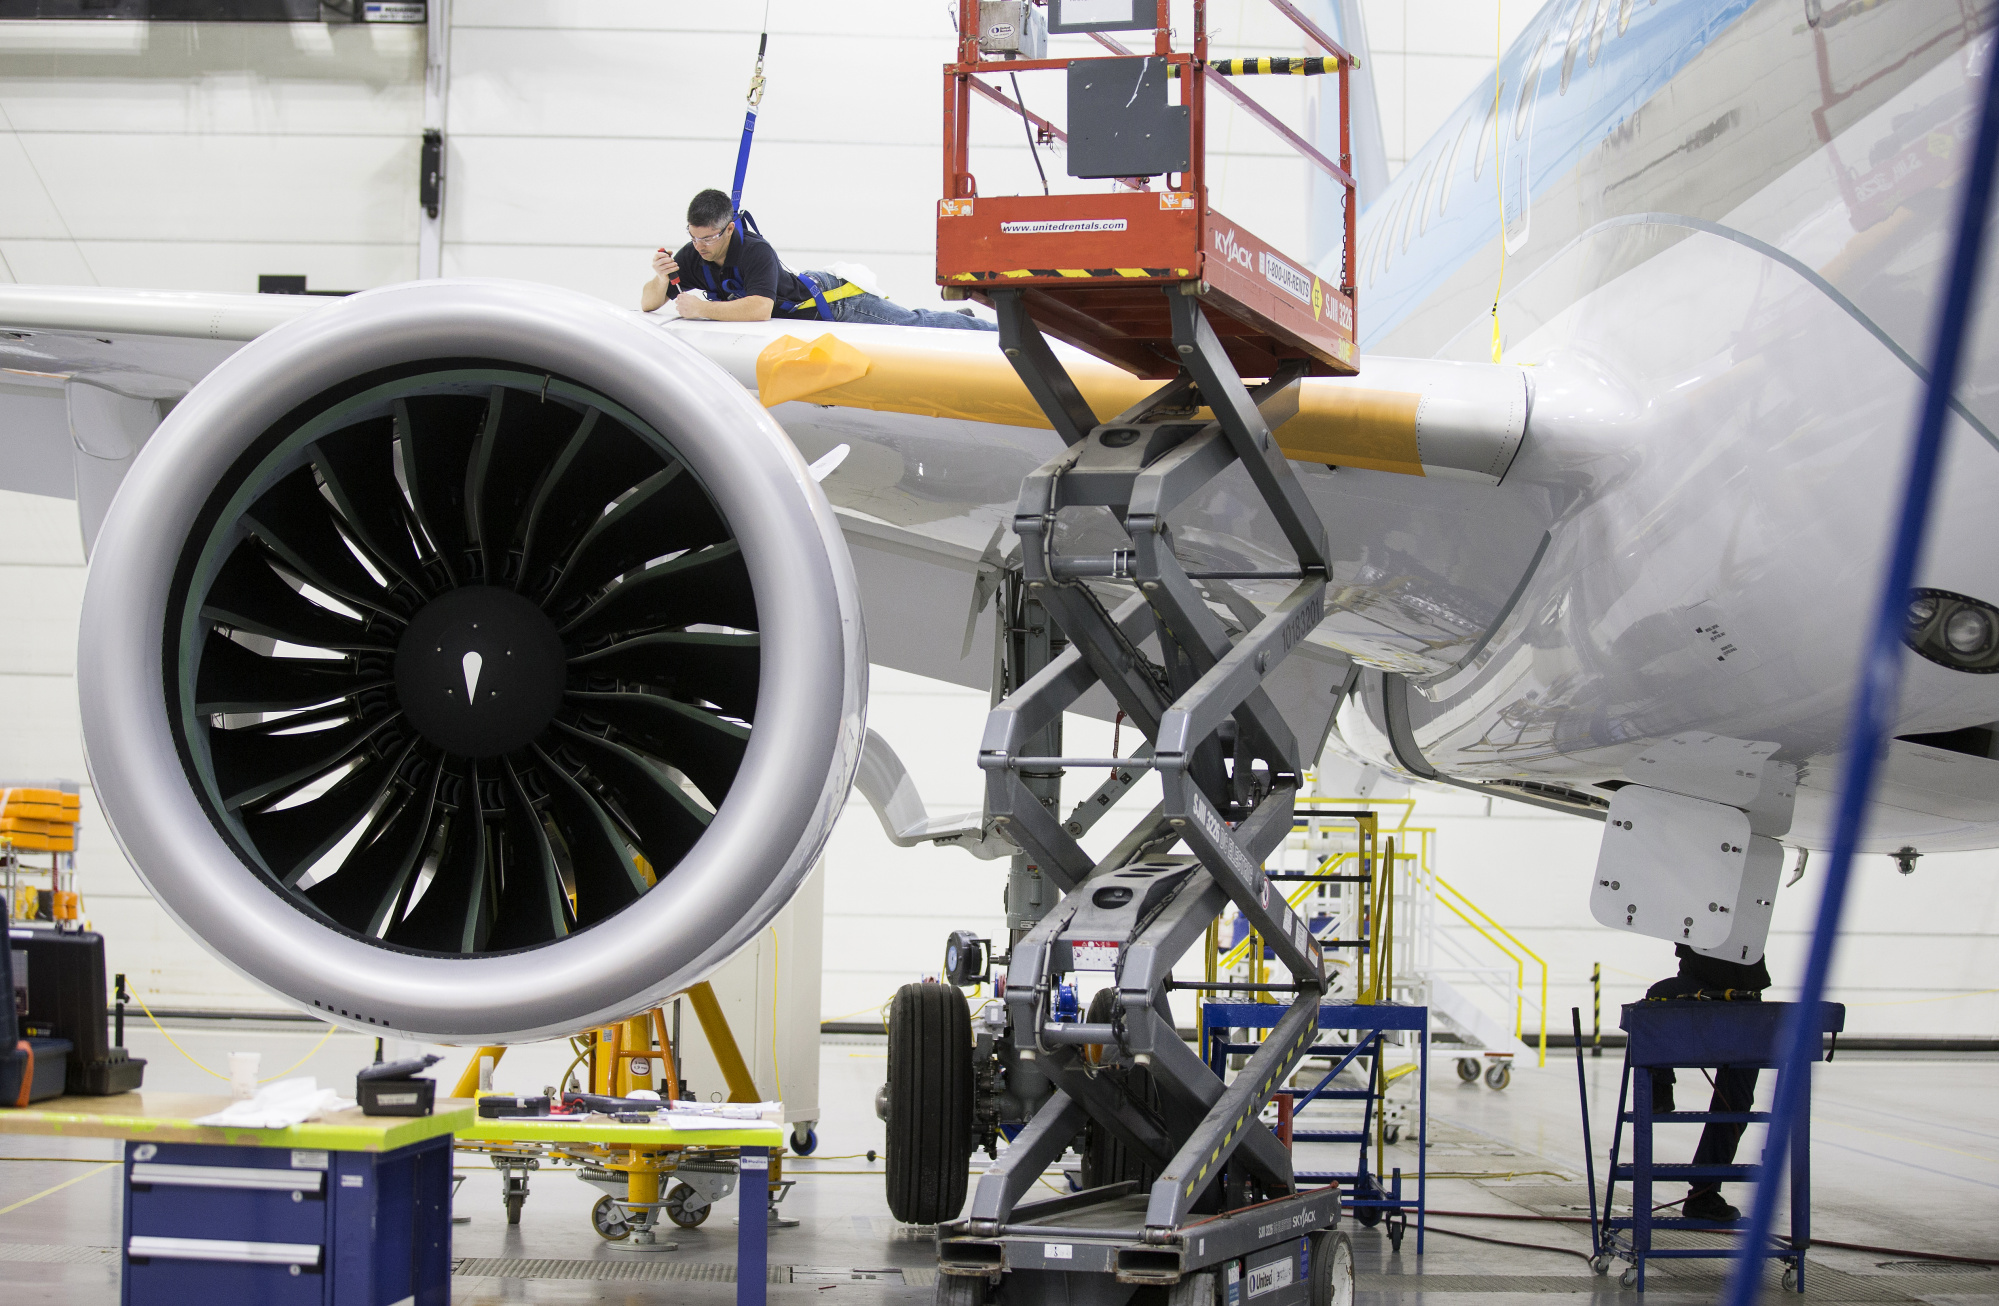 An employee works on the wing of a Bombardier Inc. CS300 airplane at the company's hangar in Mirabel, Quebec, Canada, on&nbsp;Dec. 22.&nbsp;